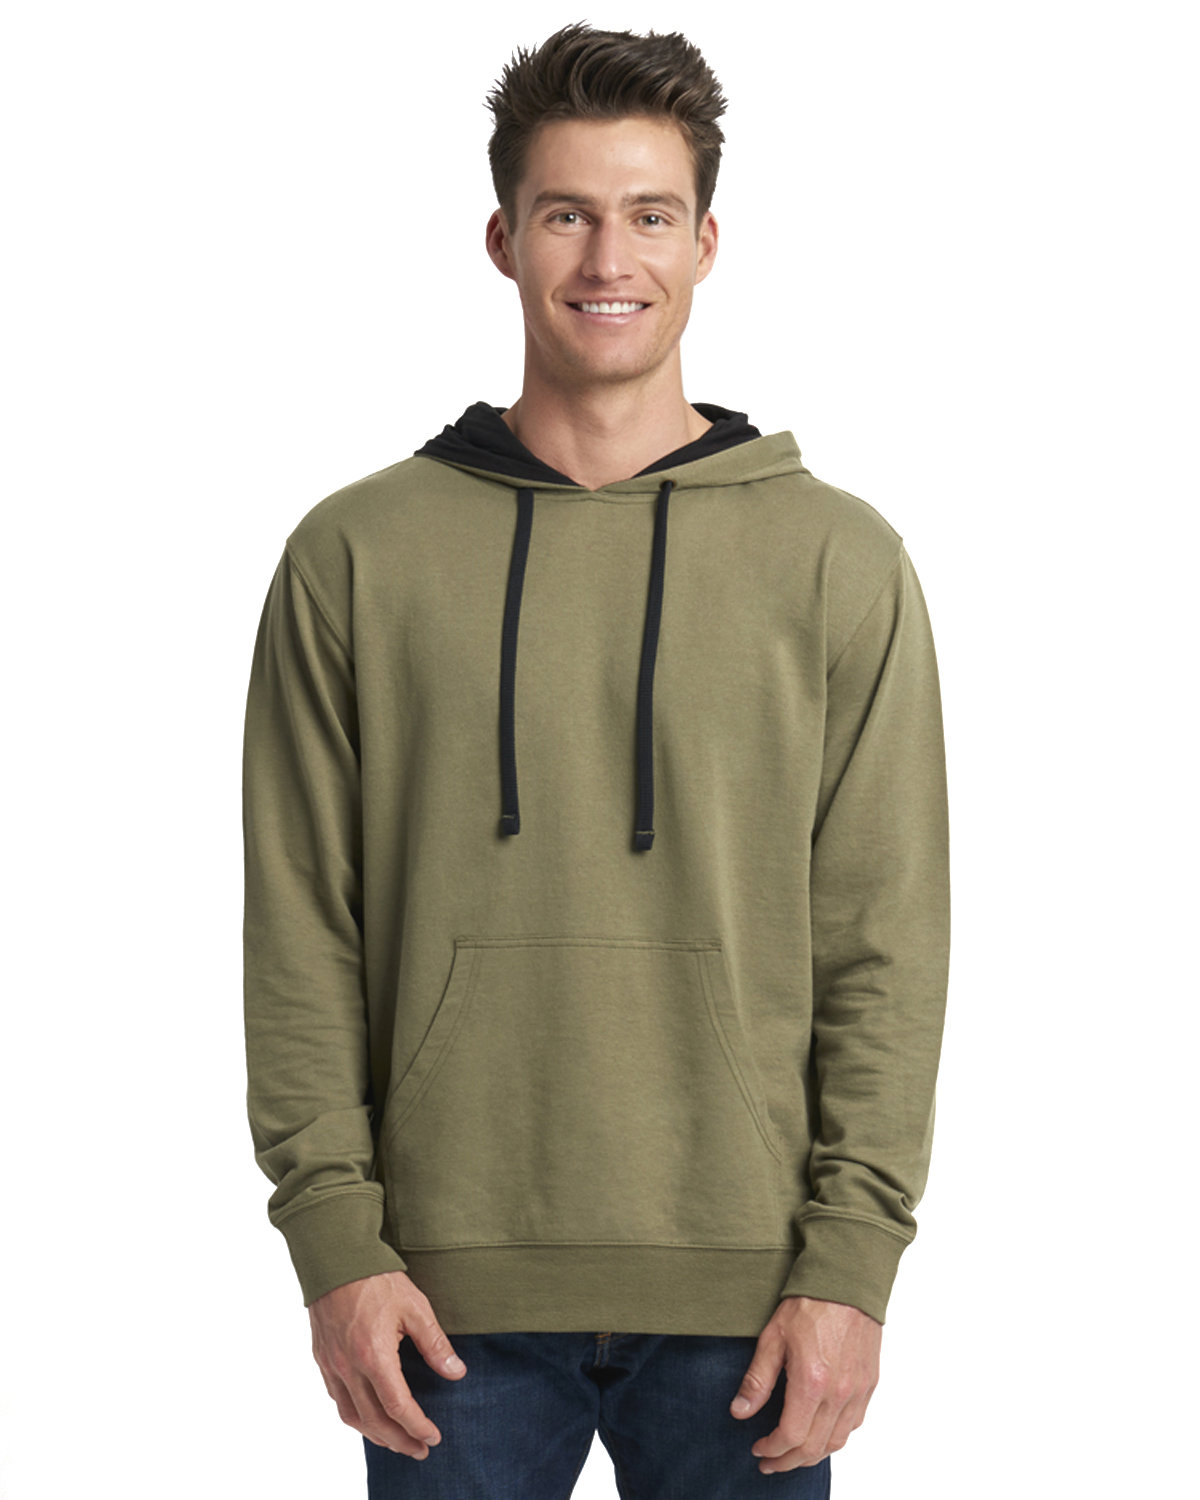 Next Level Apparel Unisex Laguna French Terry Pullover Hooded Sweatshirt MILTRY GRN/ BLK 